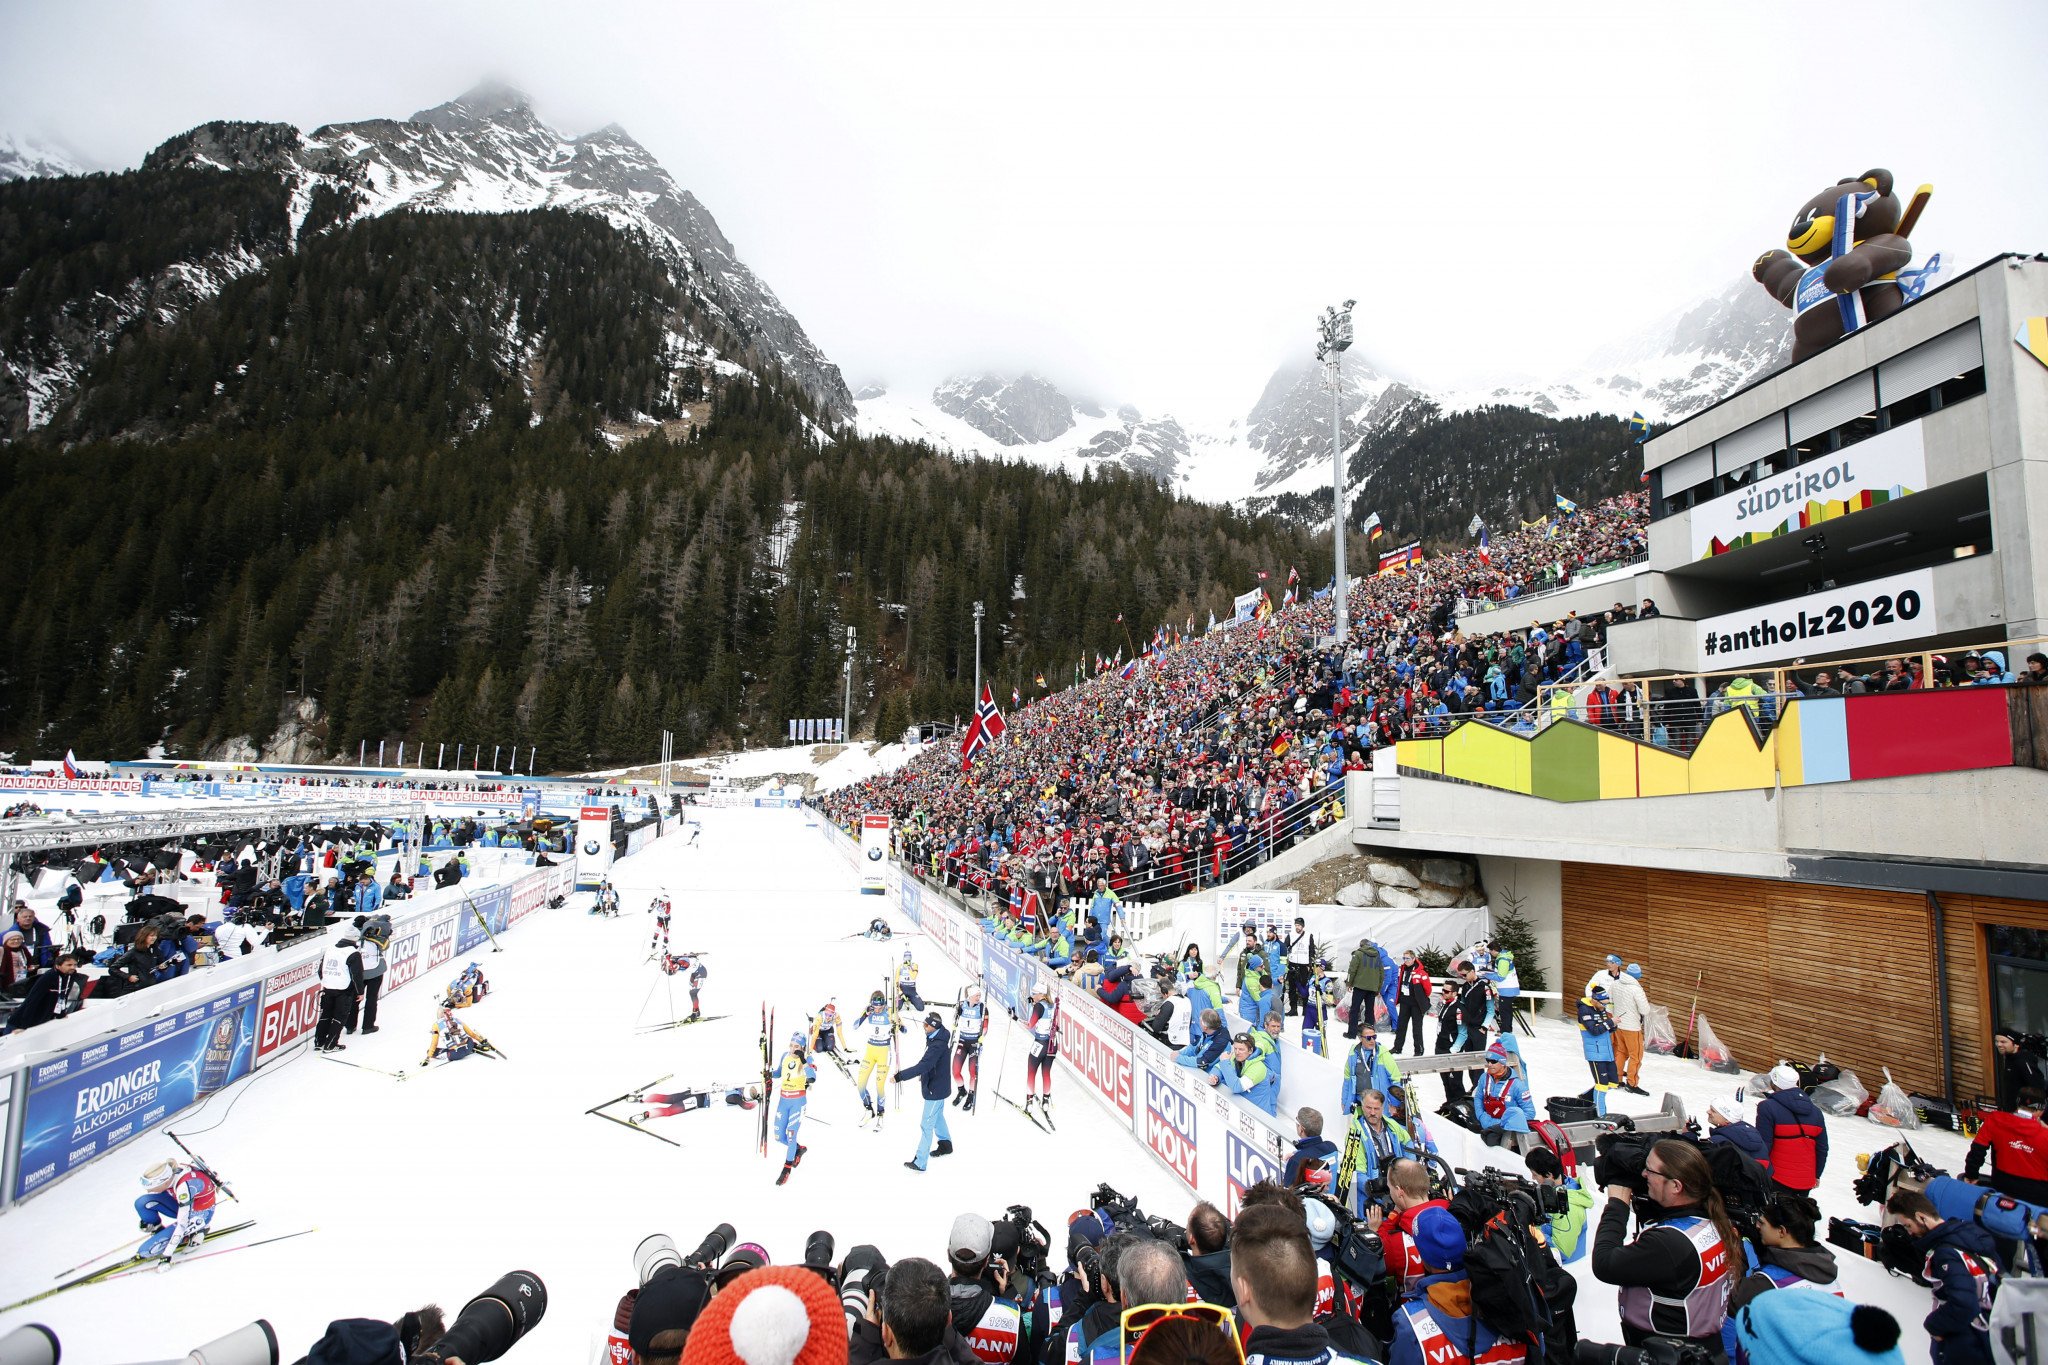 Antholz has held the IBU World Championships on six occasions, most recently in 2020 ©Getty Images